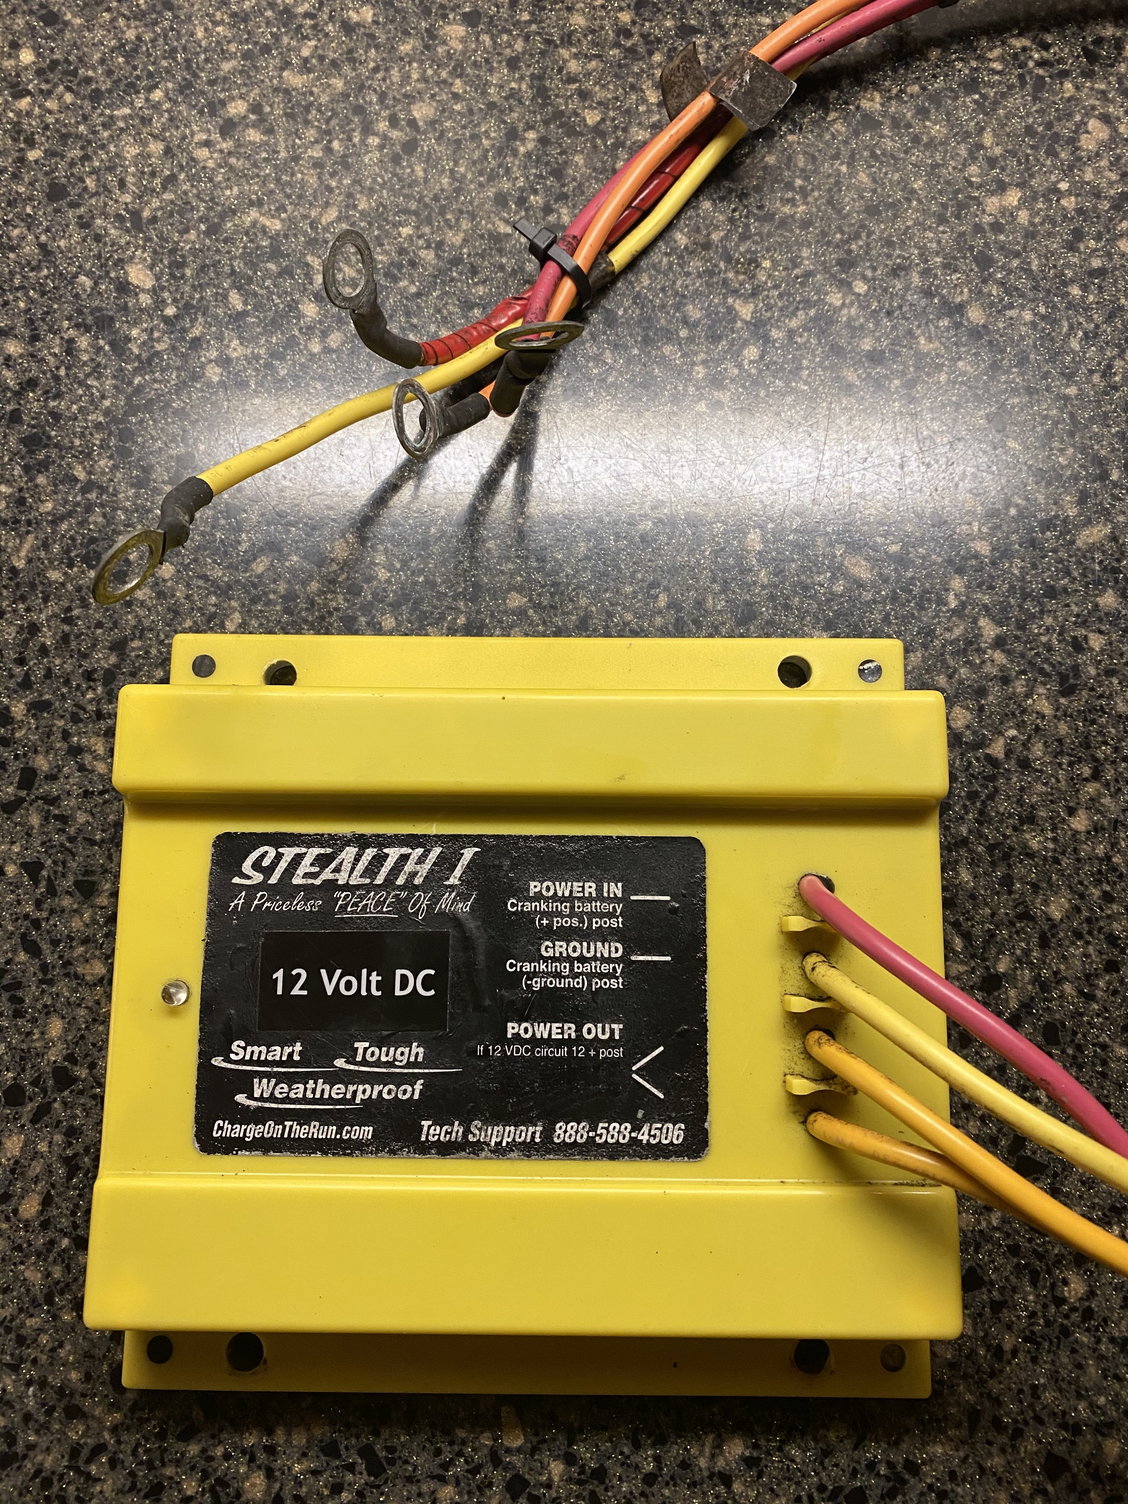 Stealth 1 Battery Charger   The Hull Truth   Boating and Fishing Forum